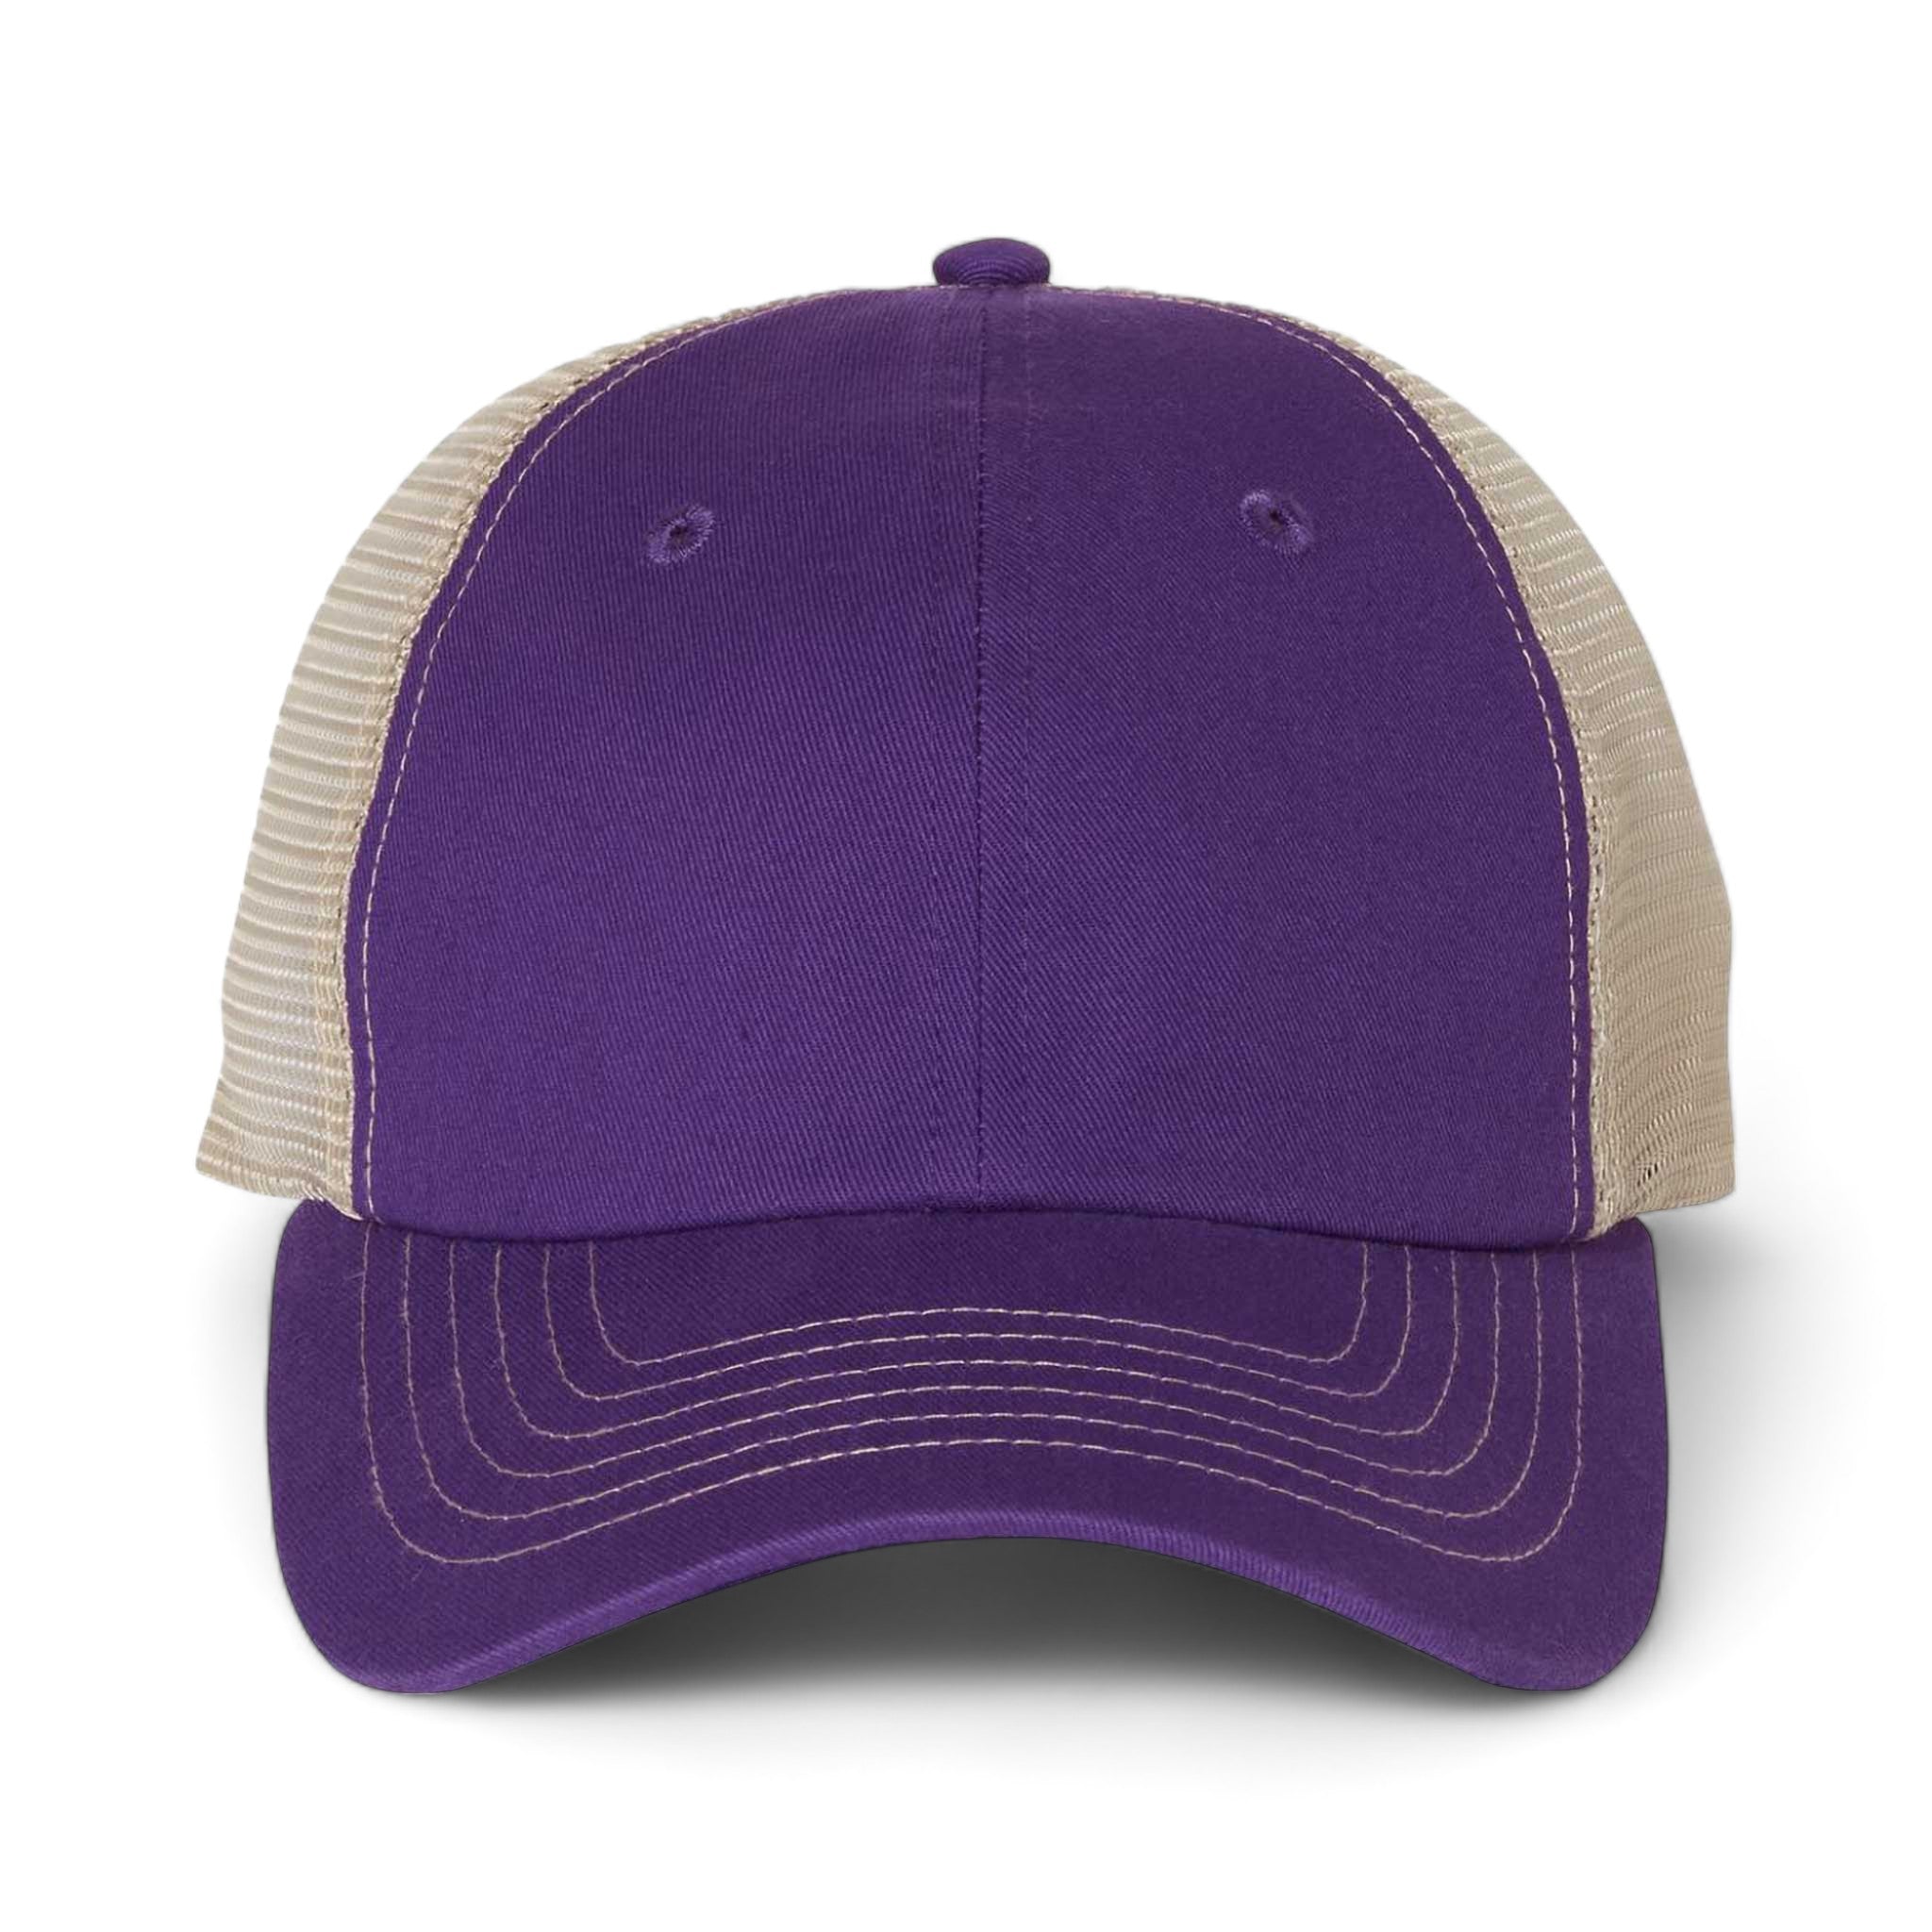 Front view of Sportsman 3100 custom hat in purple and stone